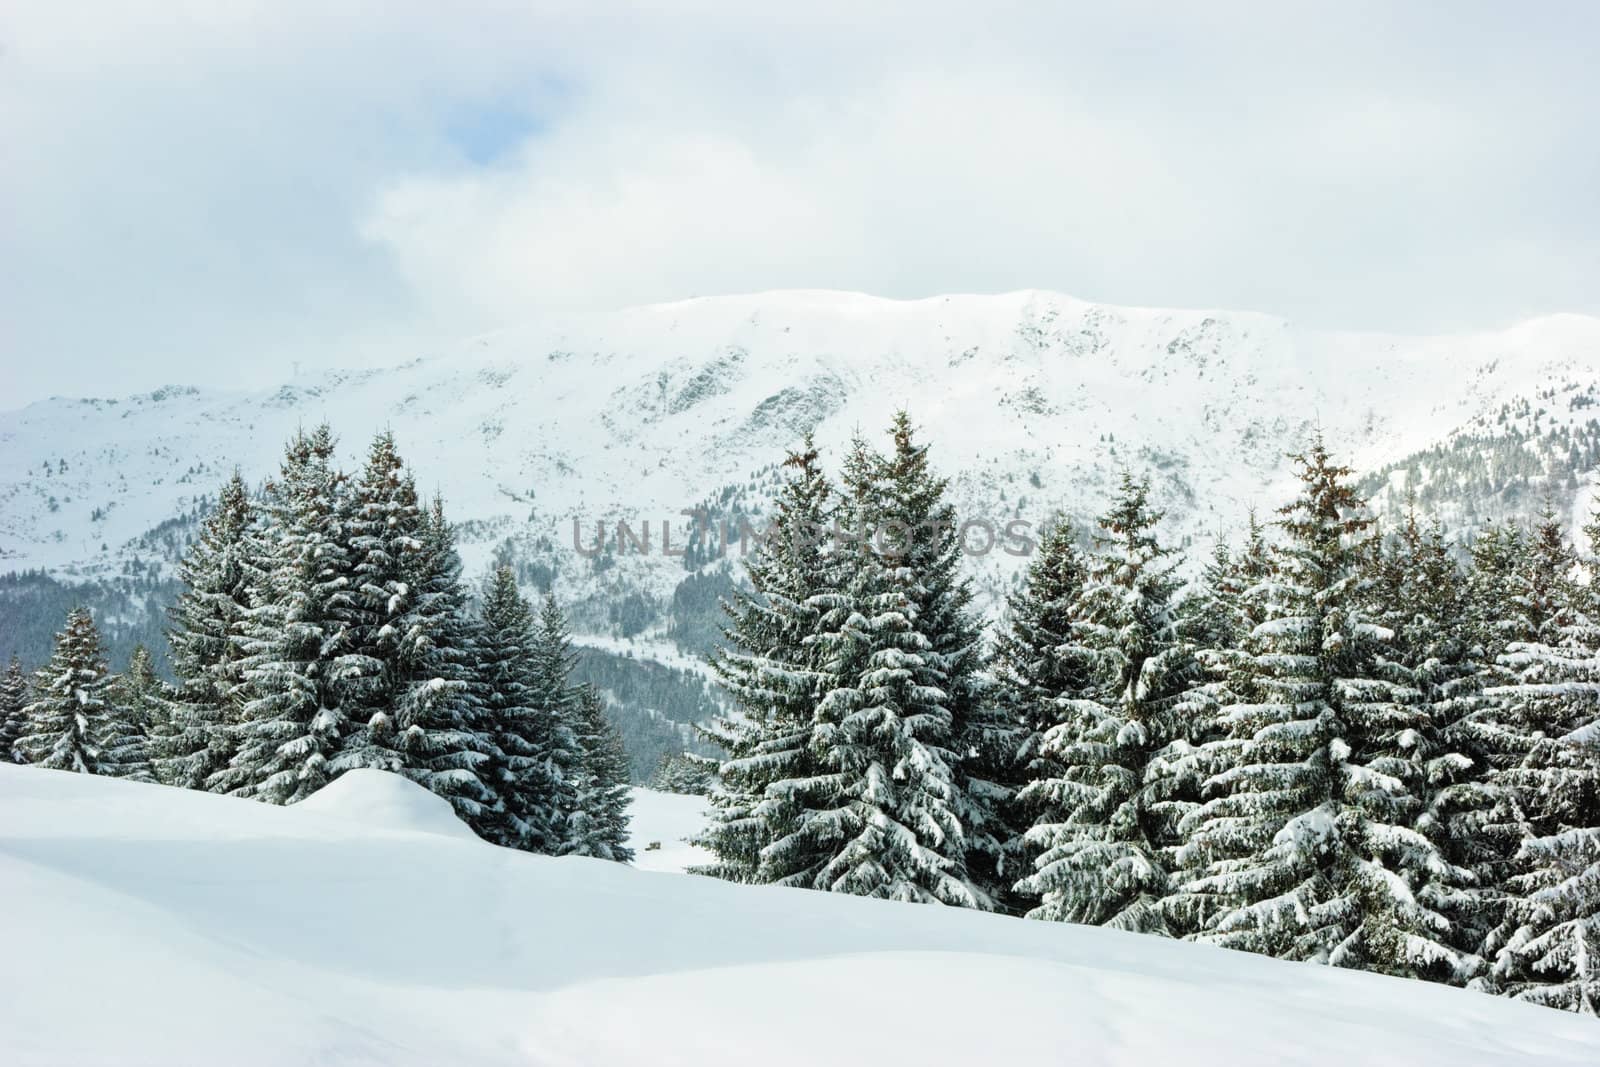 Fir trees covered with snow on winter mountain at French Alps